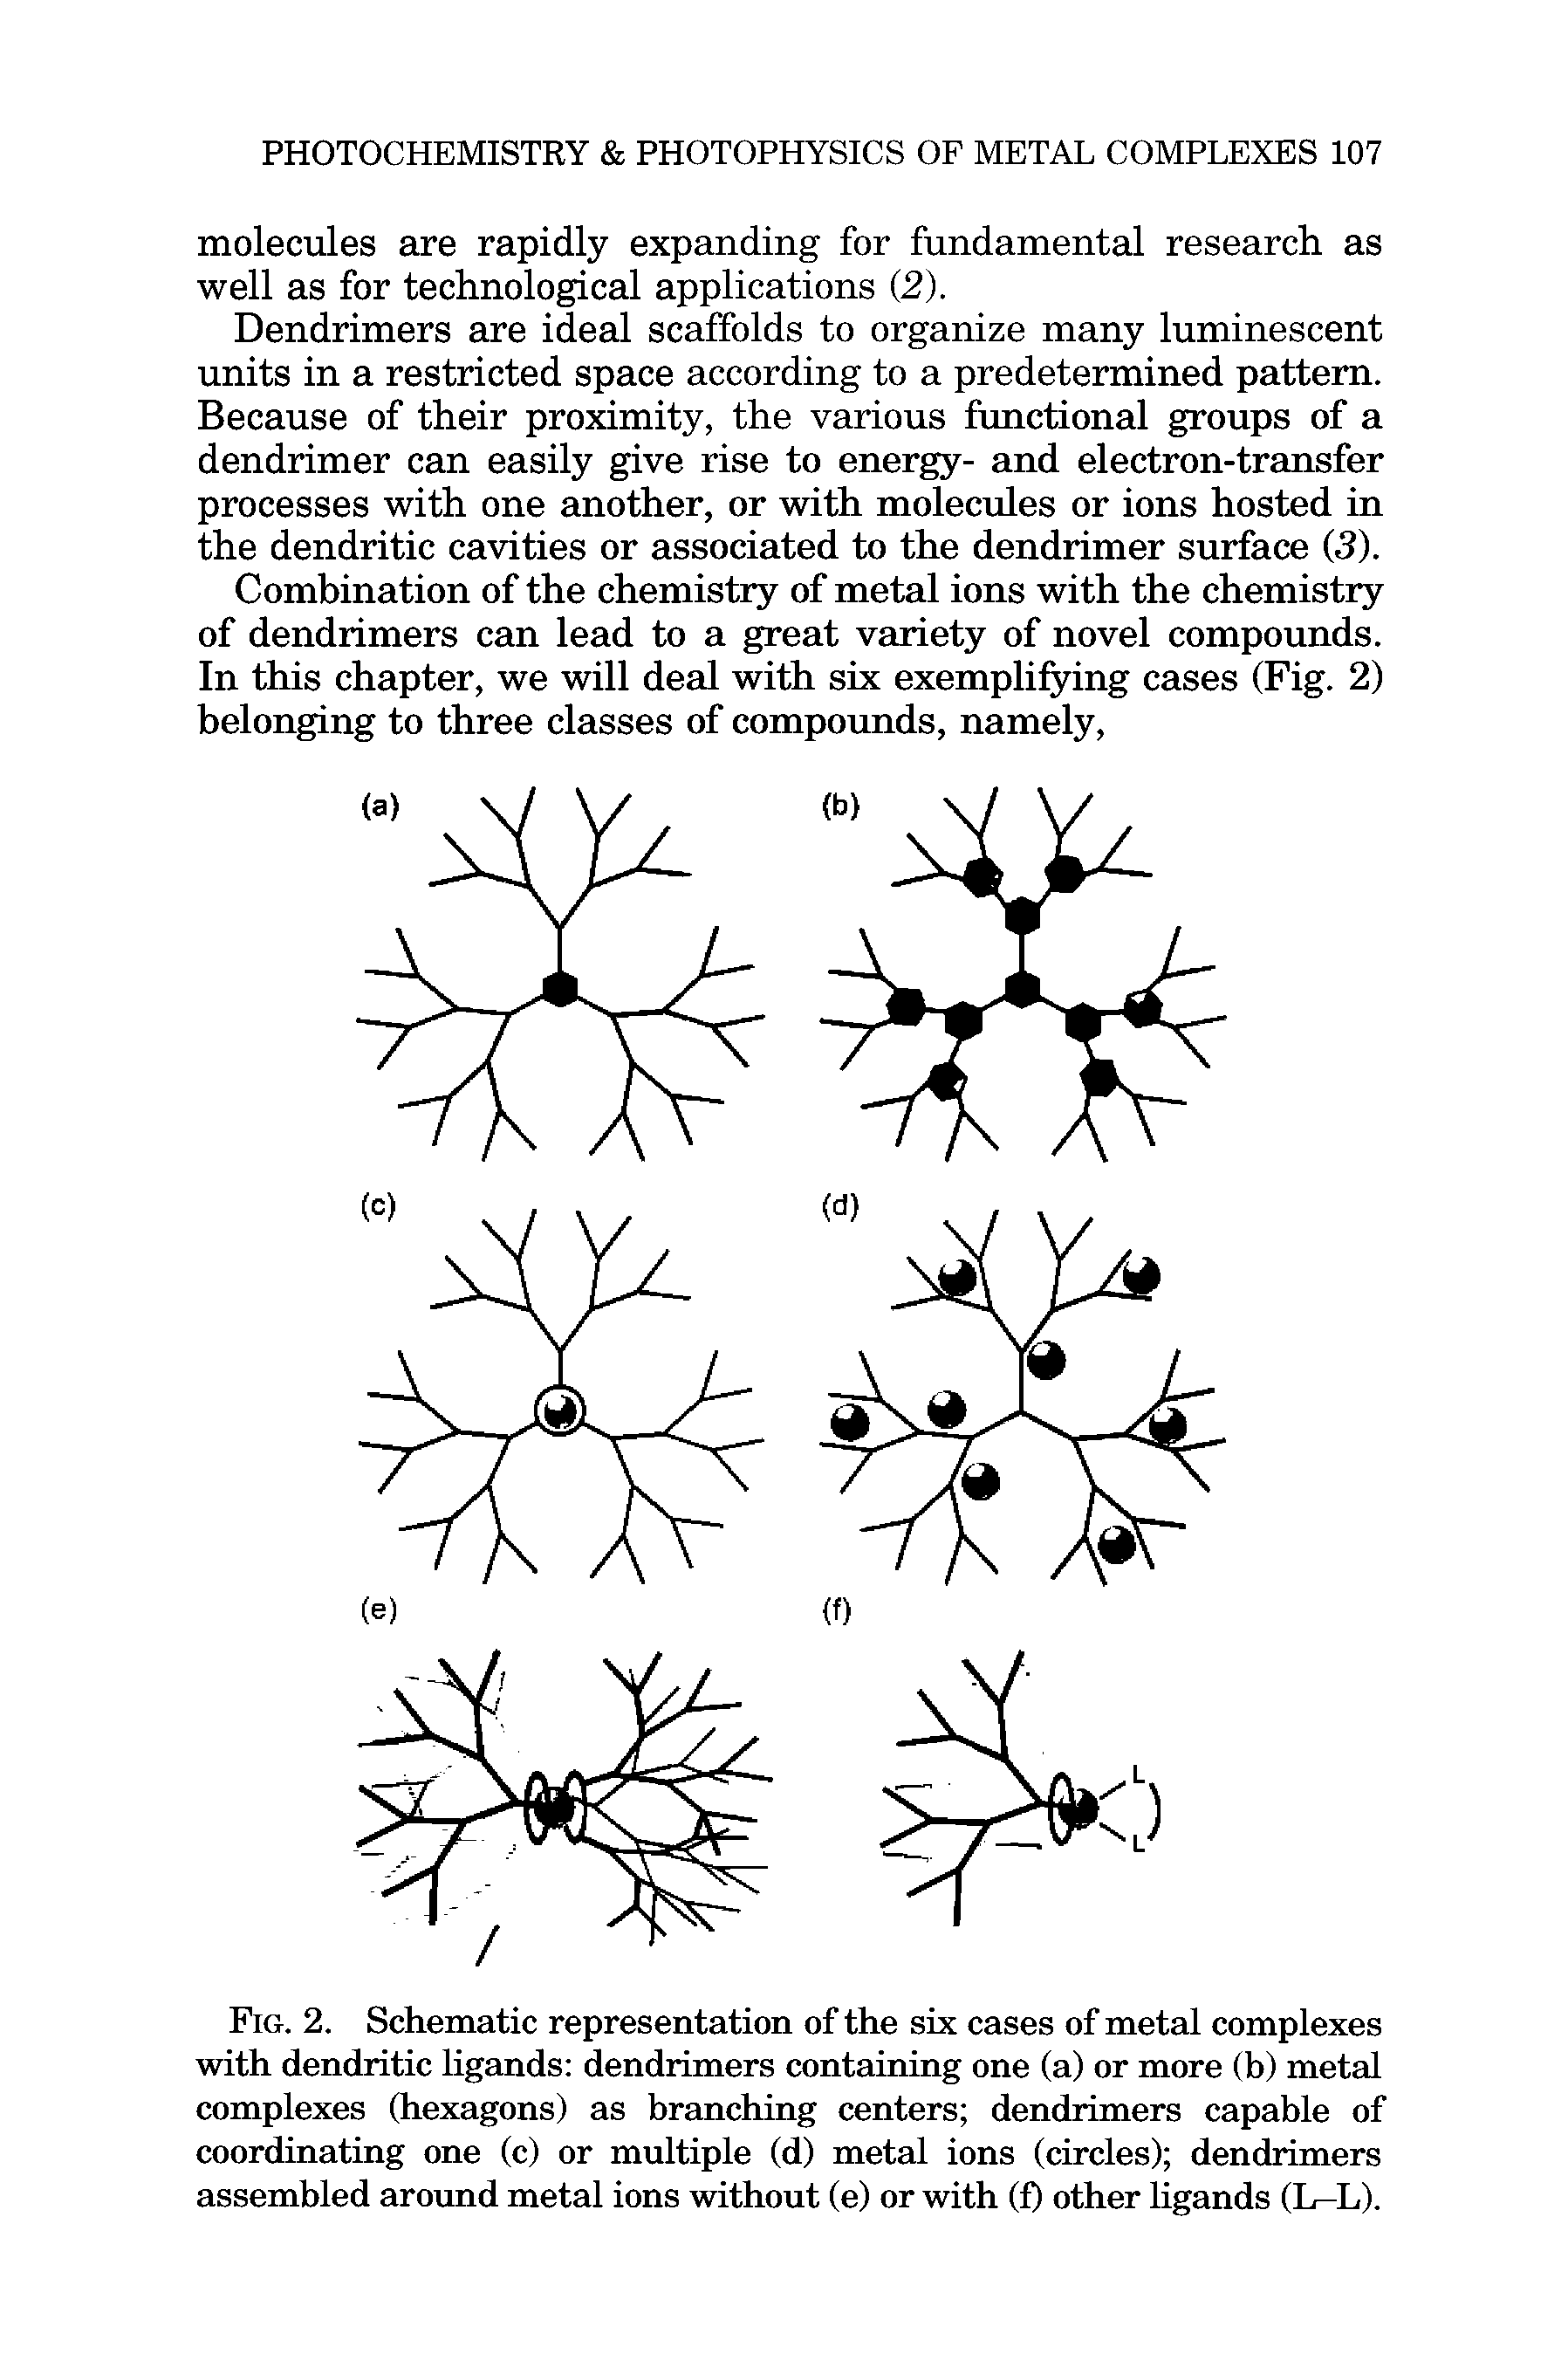 Fig. 2. Schematic representation of the six cases of metal complexes with dendritic ligands dendrimers containing one (a) or more (b) metal complexes (hexagons) as branching centers dendrimers capable of coordinating one (c) or multiple (d) metal ions (circles) dendrimers assembled around metal ions without (e) or with (f) other ligands (L-L).